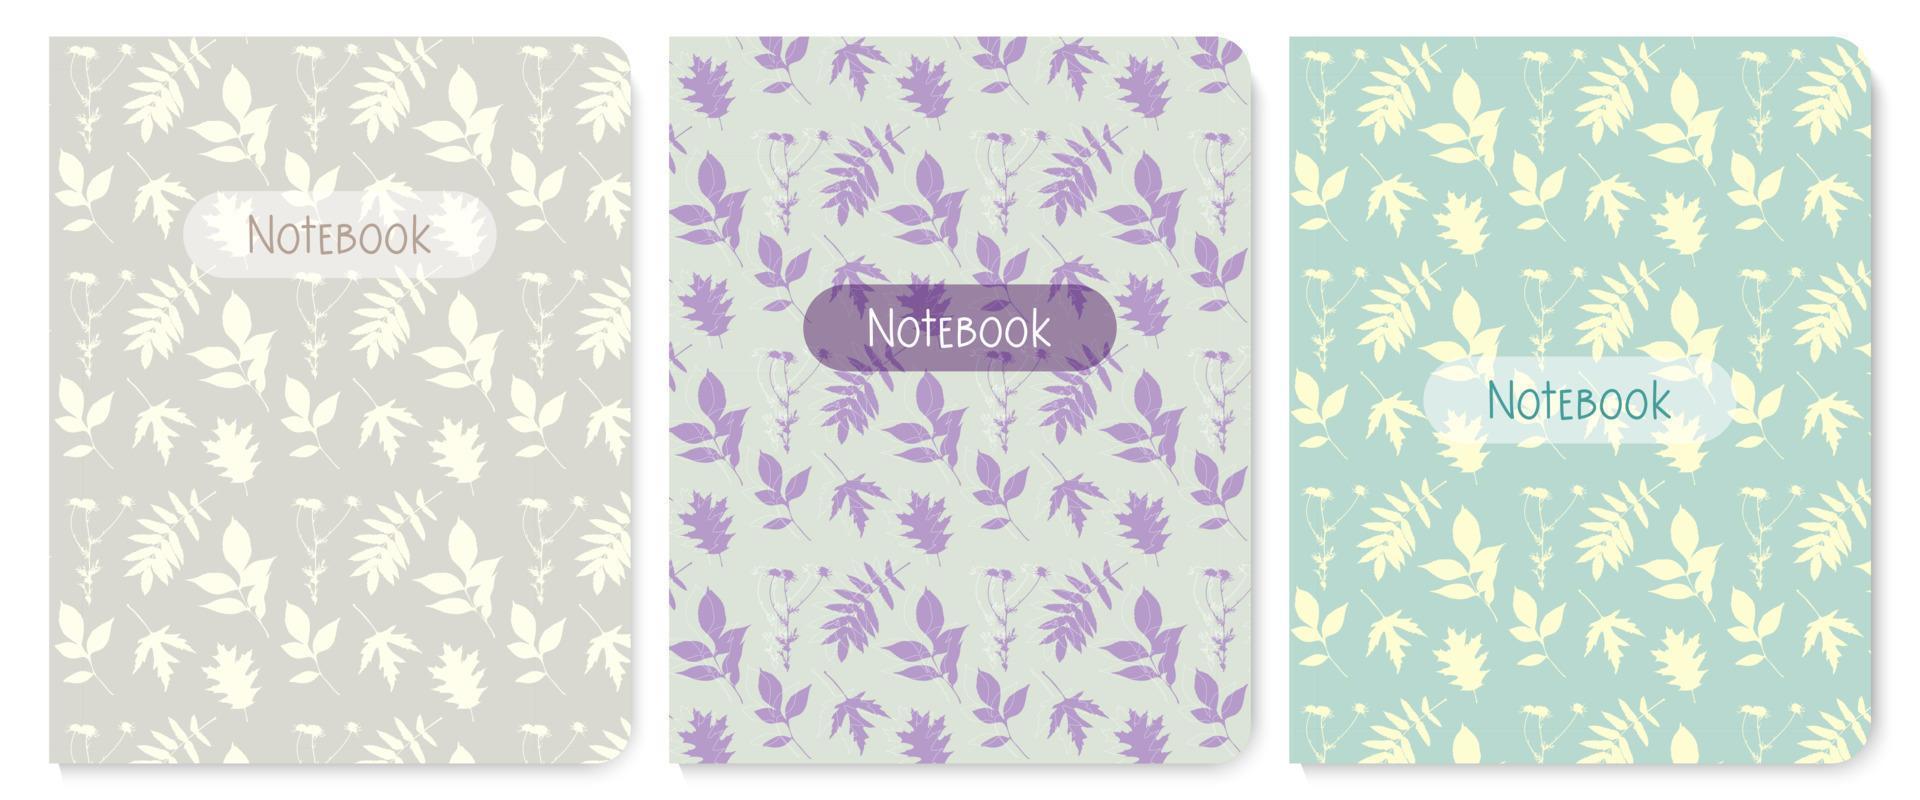 Notebook, diary covers set. Herbal herbarium floral design. For notebooks, planners, brochures, books, catalogs, cards, invitations etc. vector